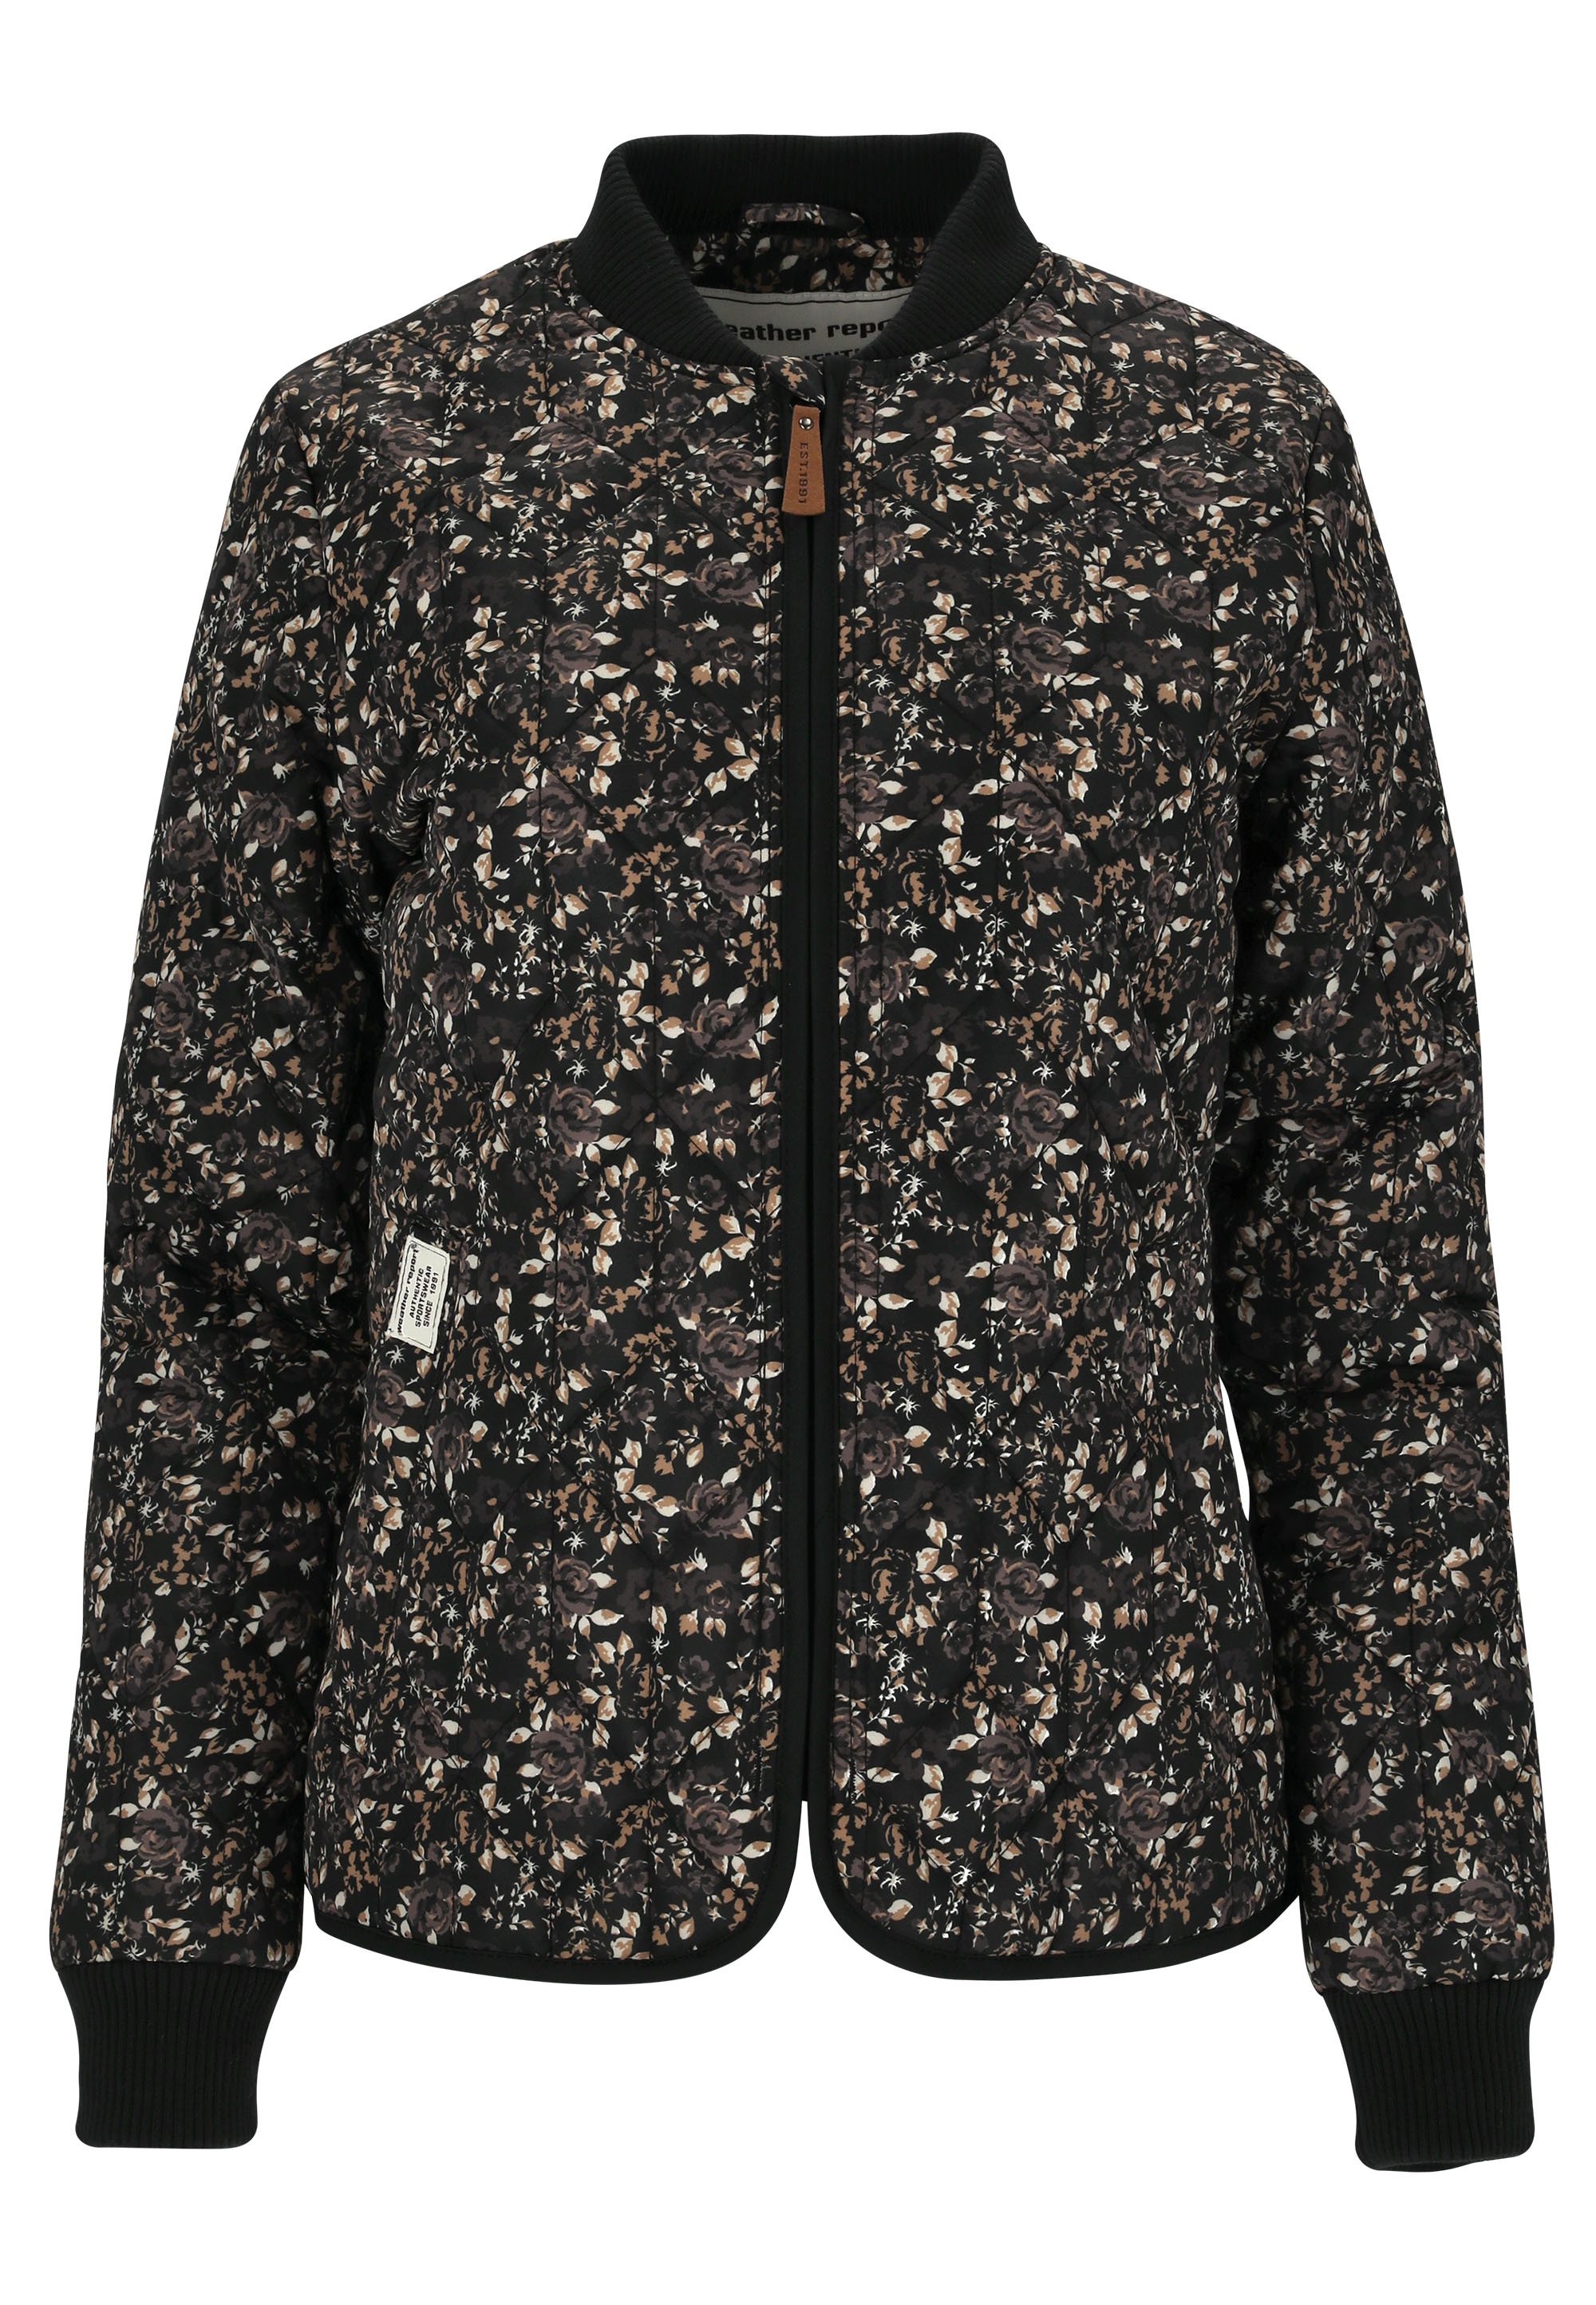 »Floral«, mit online Outdoorjacke Allover-Muster floralem REPORT WEATHER